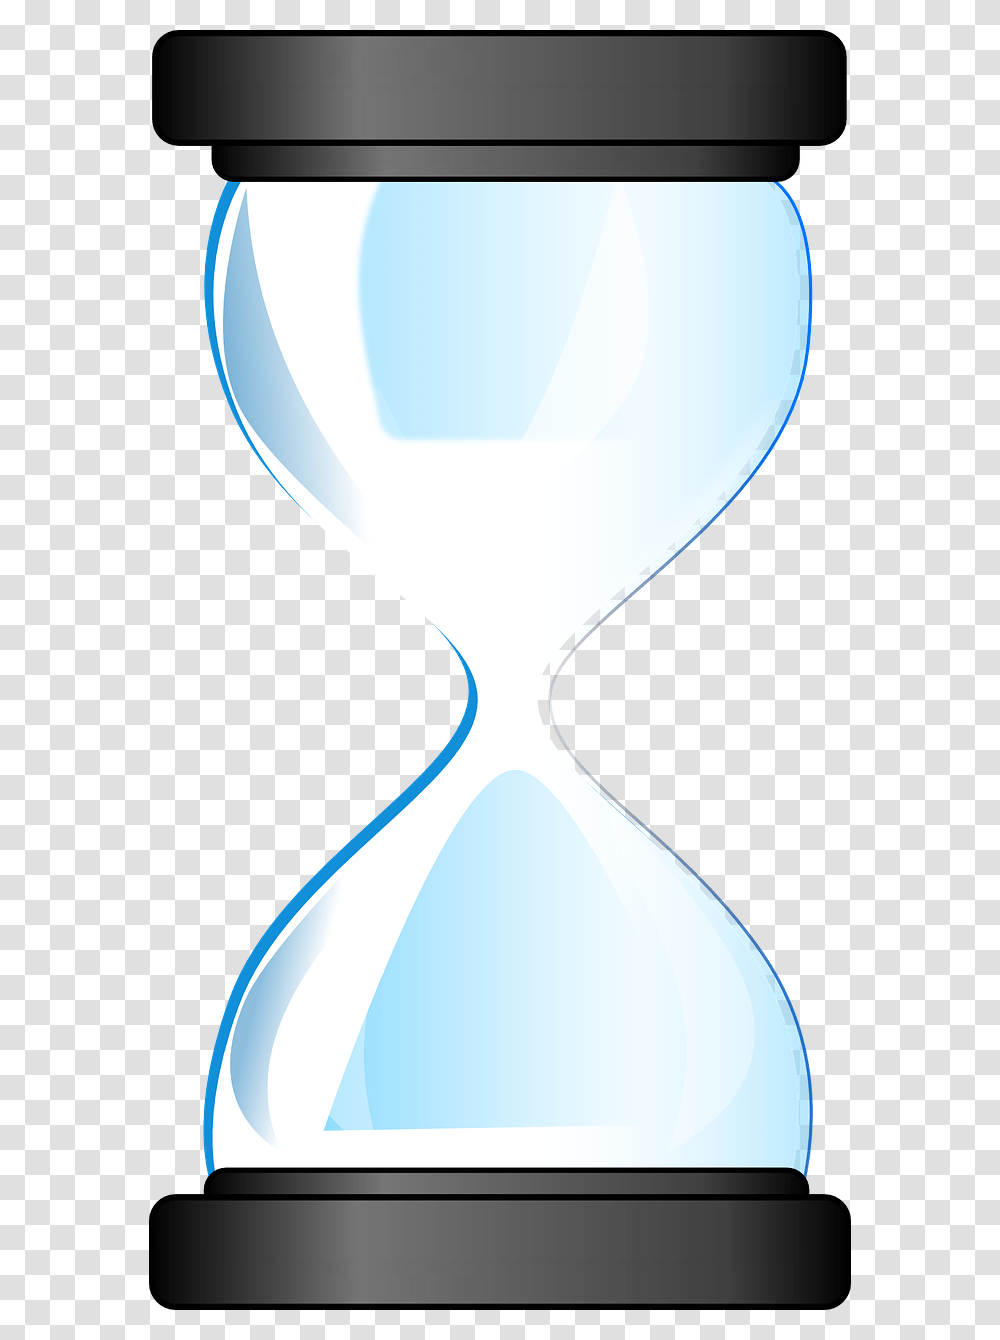 Hourglass, Lamp, Spoon, Cutlery Transparent Png